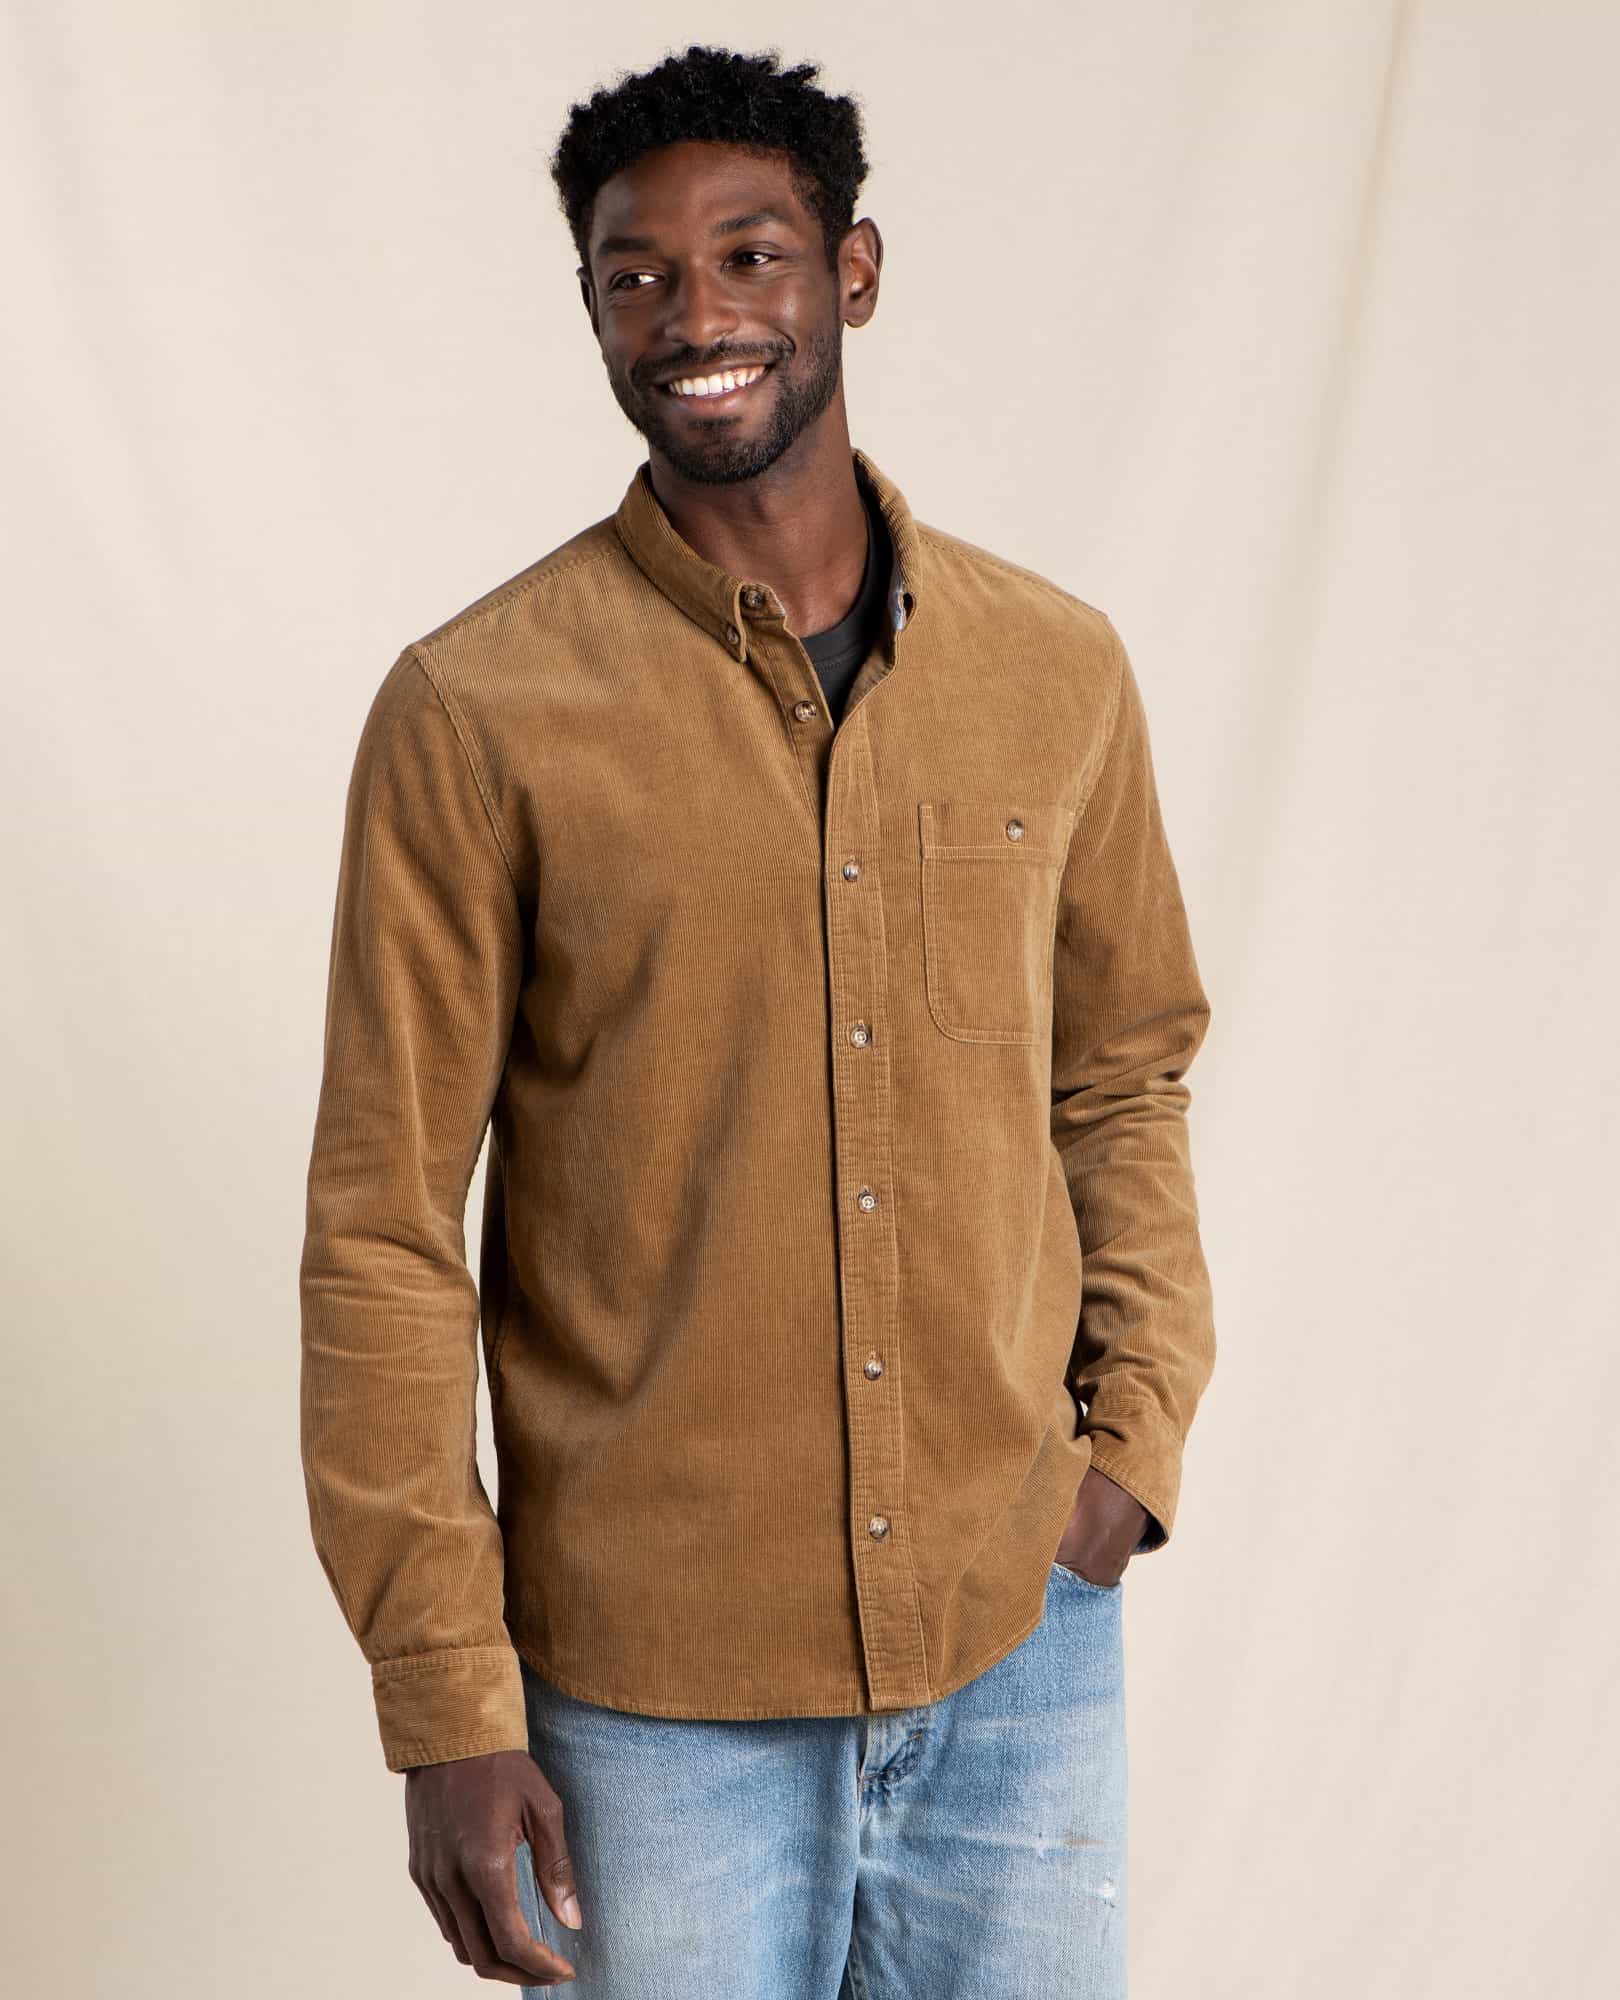 Buy Textured Formal Shirt with Long Sleeves and Pocket